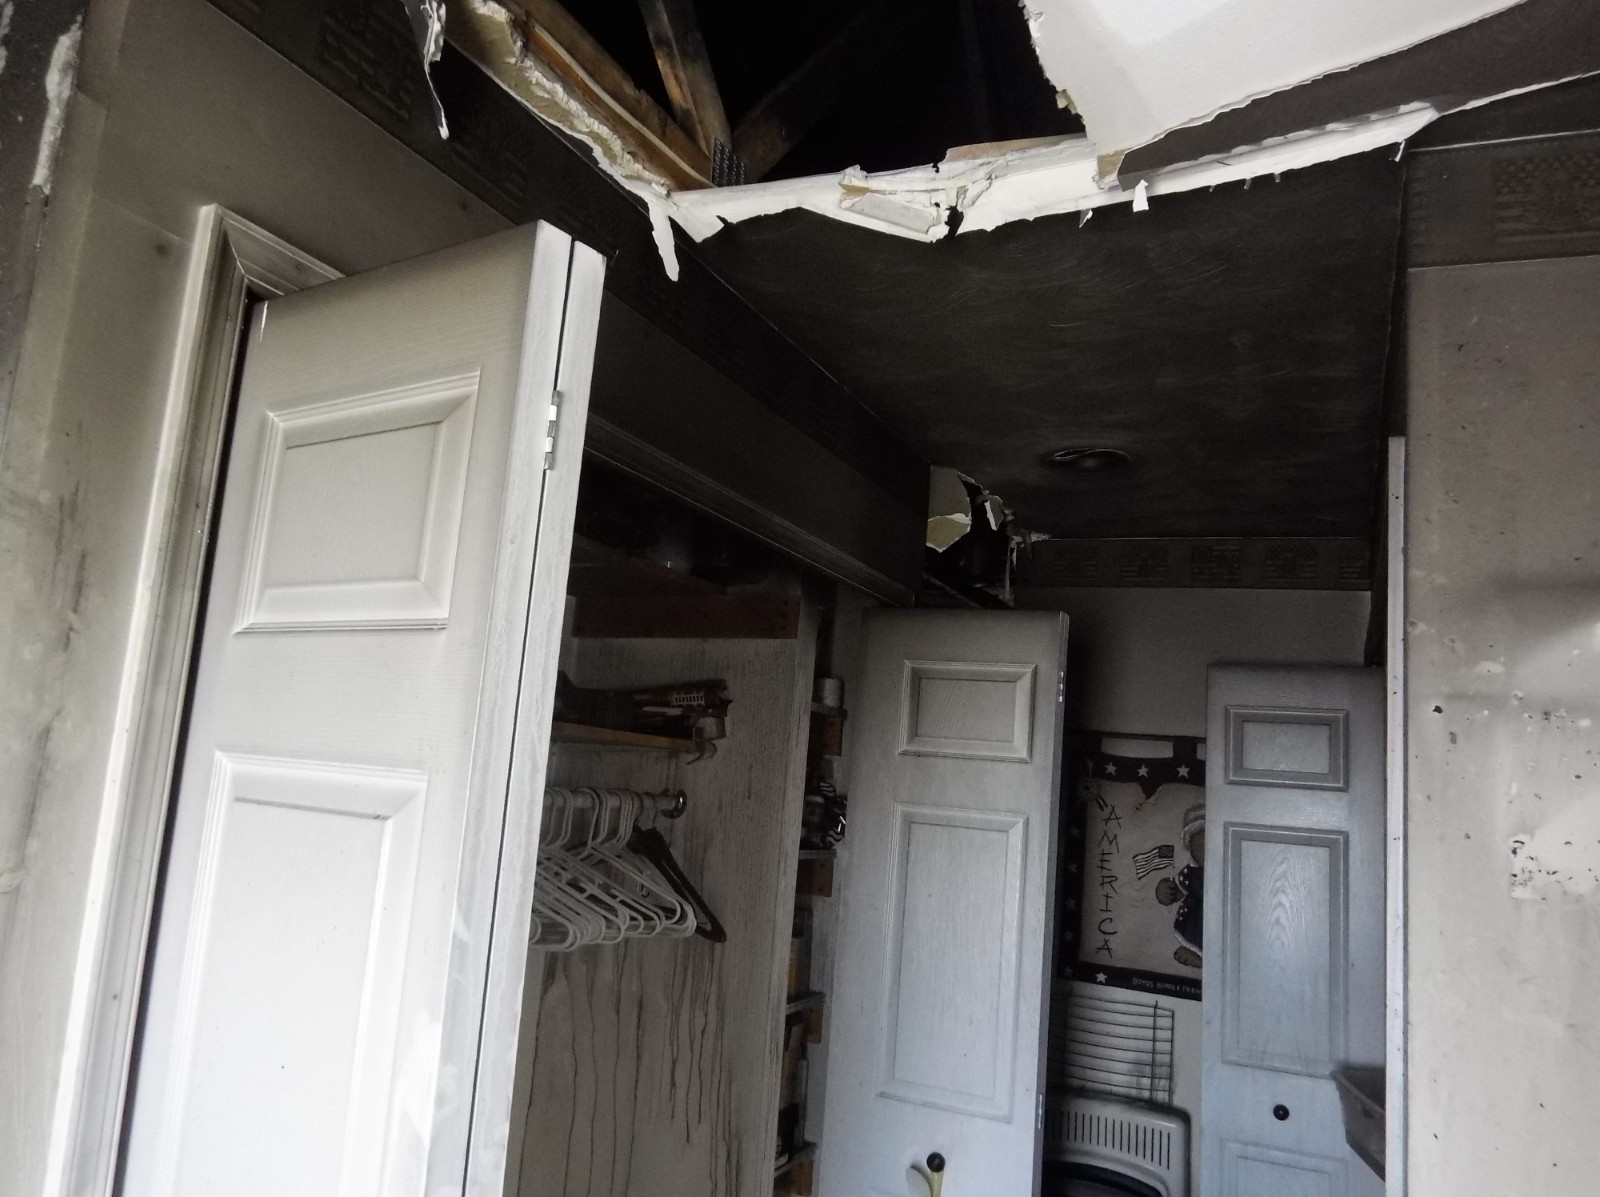 Fire damage cleanup and restoration in Ebensburg, PA? Give our SERVPRO of Ebensburg team a call today!